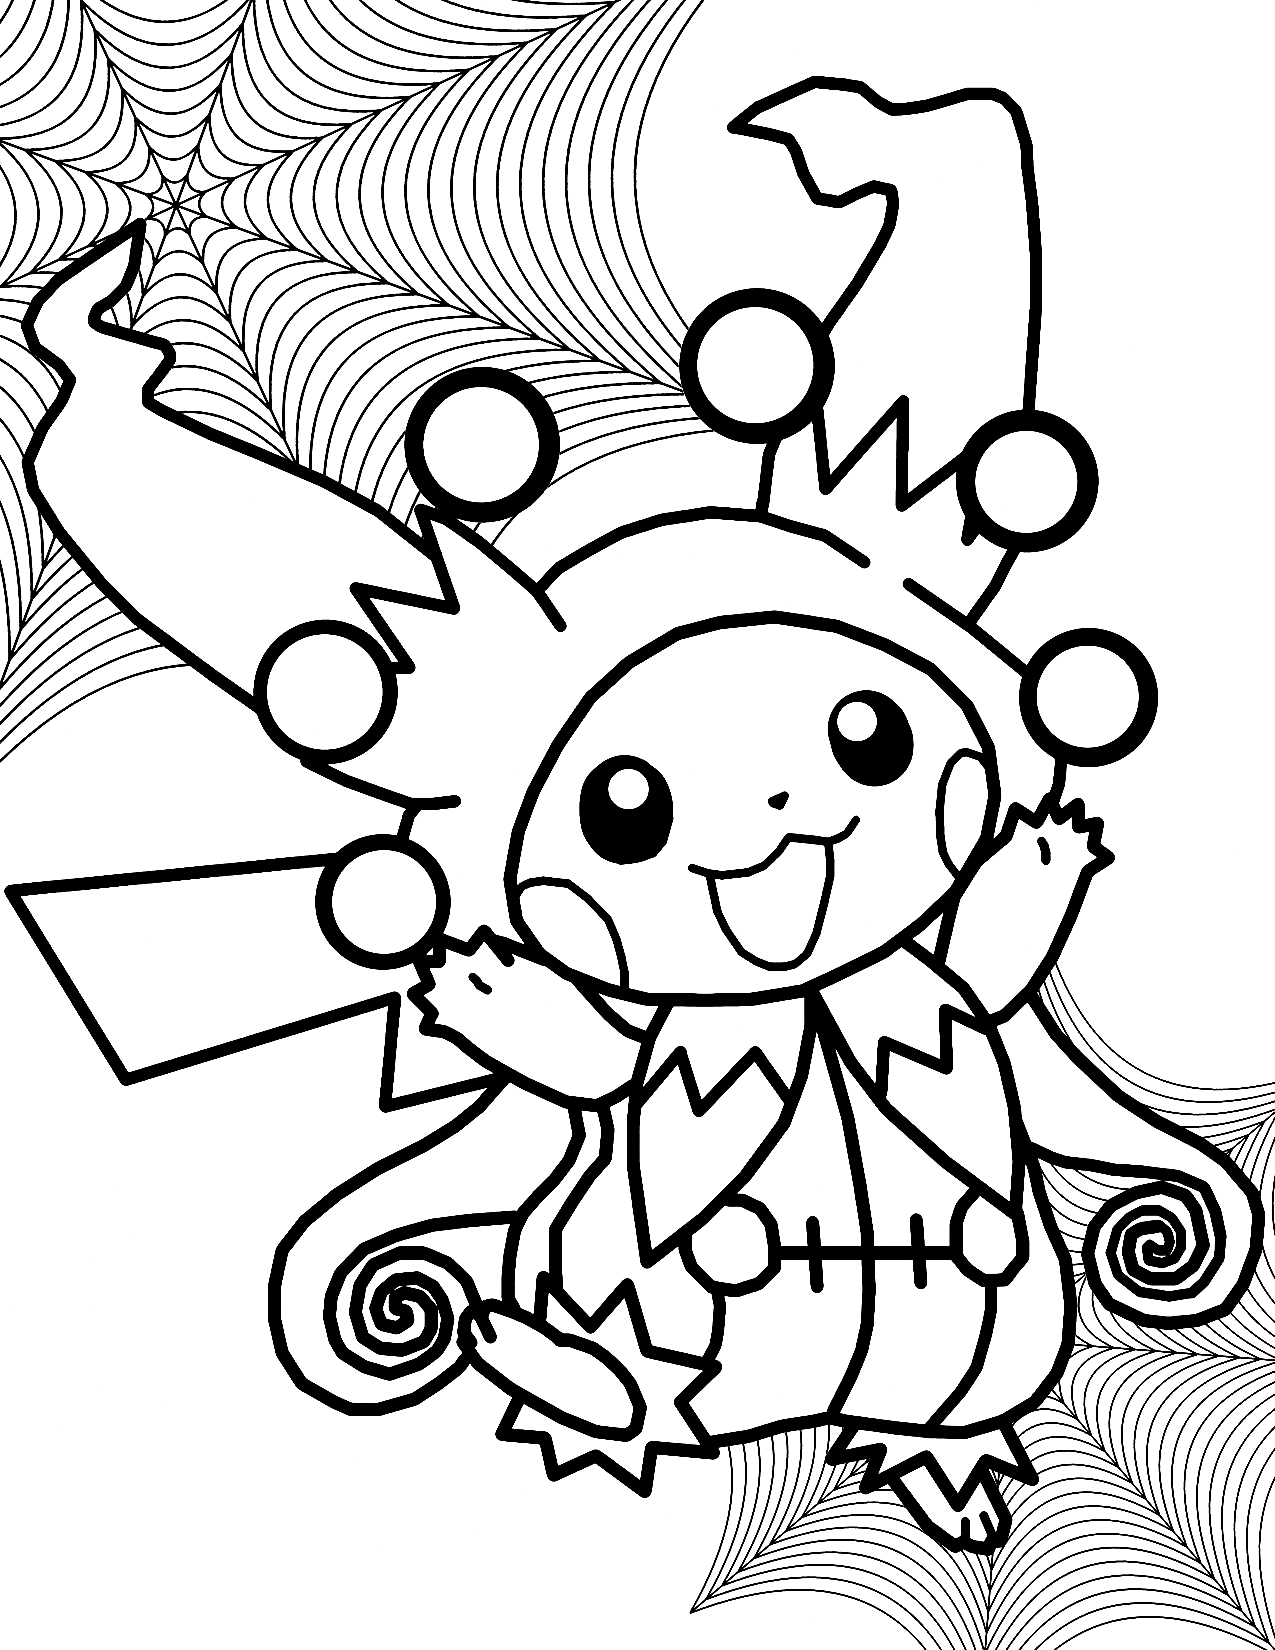 Pikachu Pokemon Halloween Coloring Pages